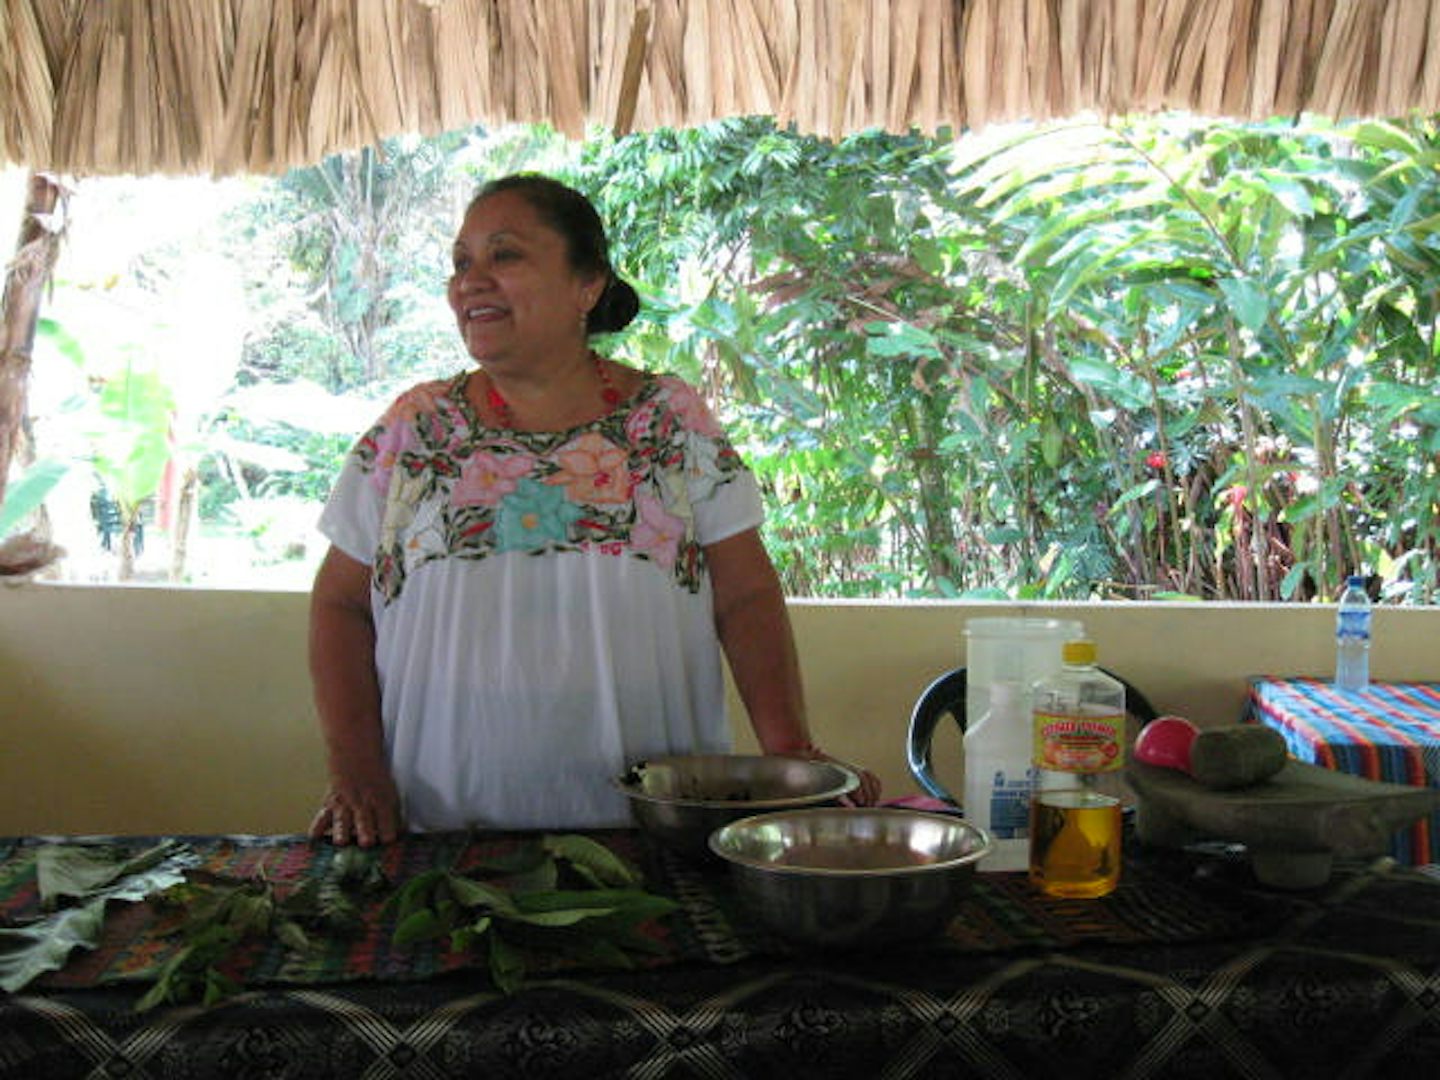 Mayan medicine traditionalist Aurora showing us how to make a very effectiv